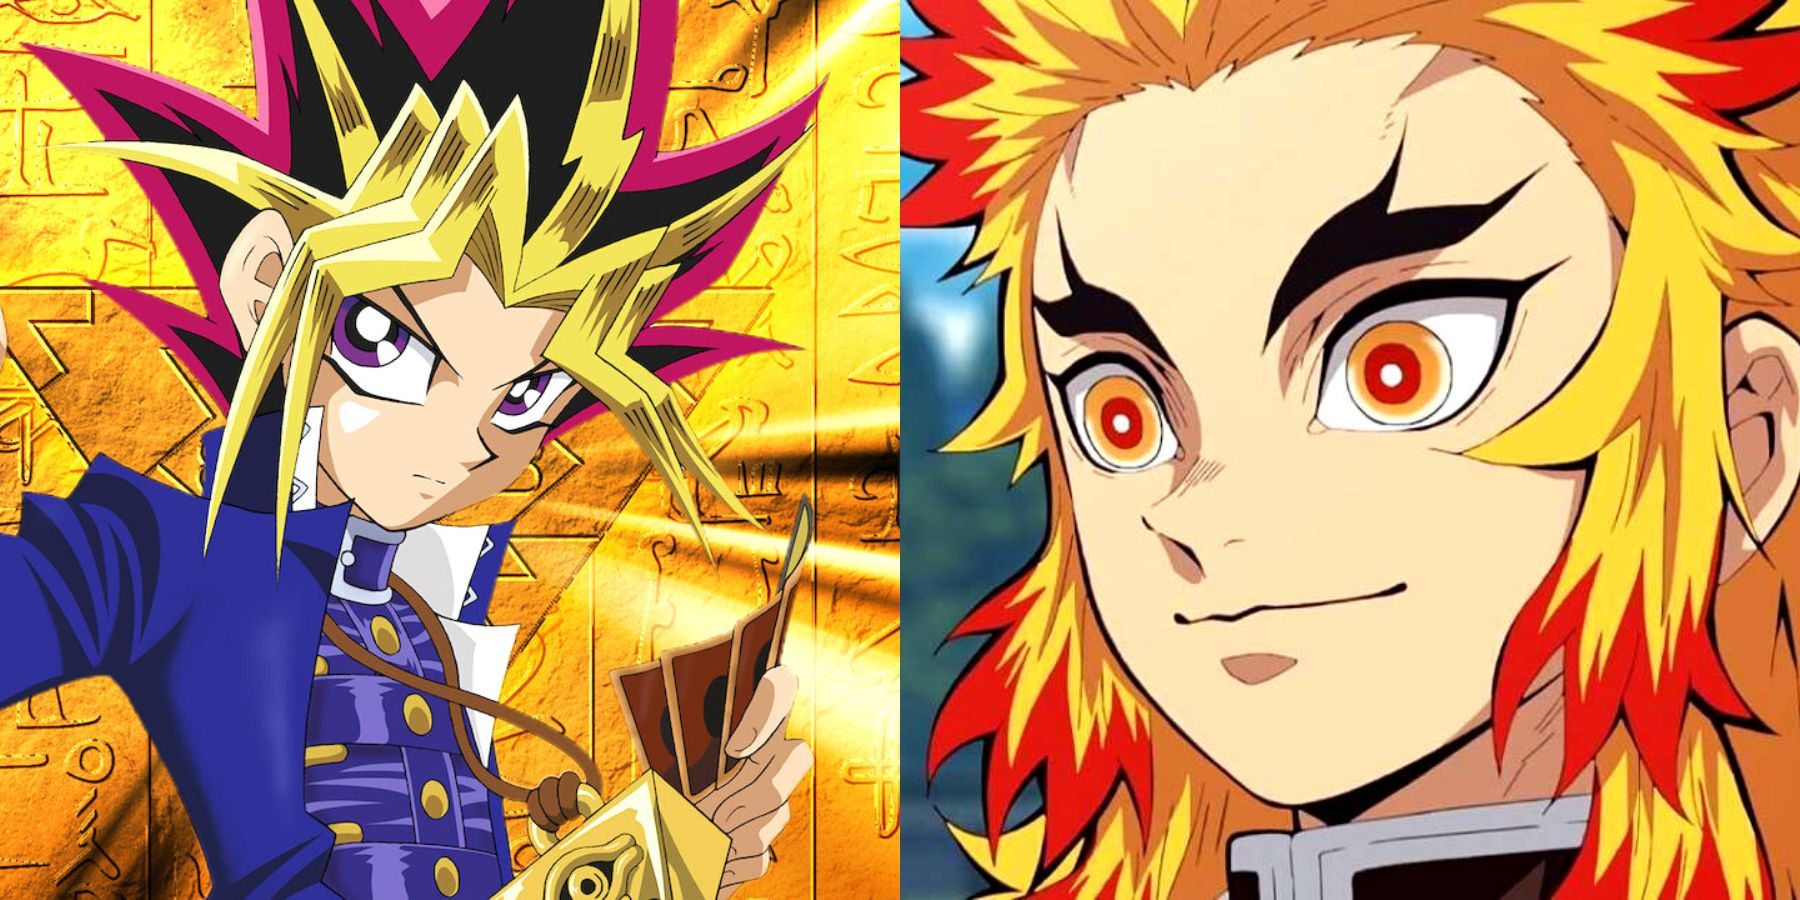 15 Best Anime Hairstyles for Men - Next Luxury